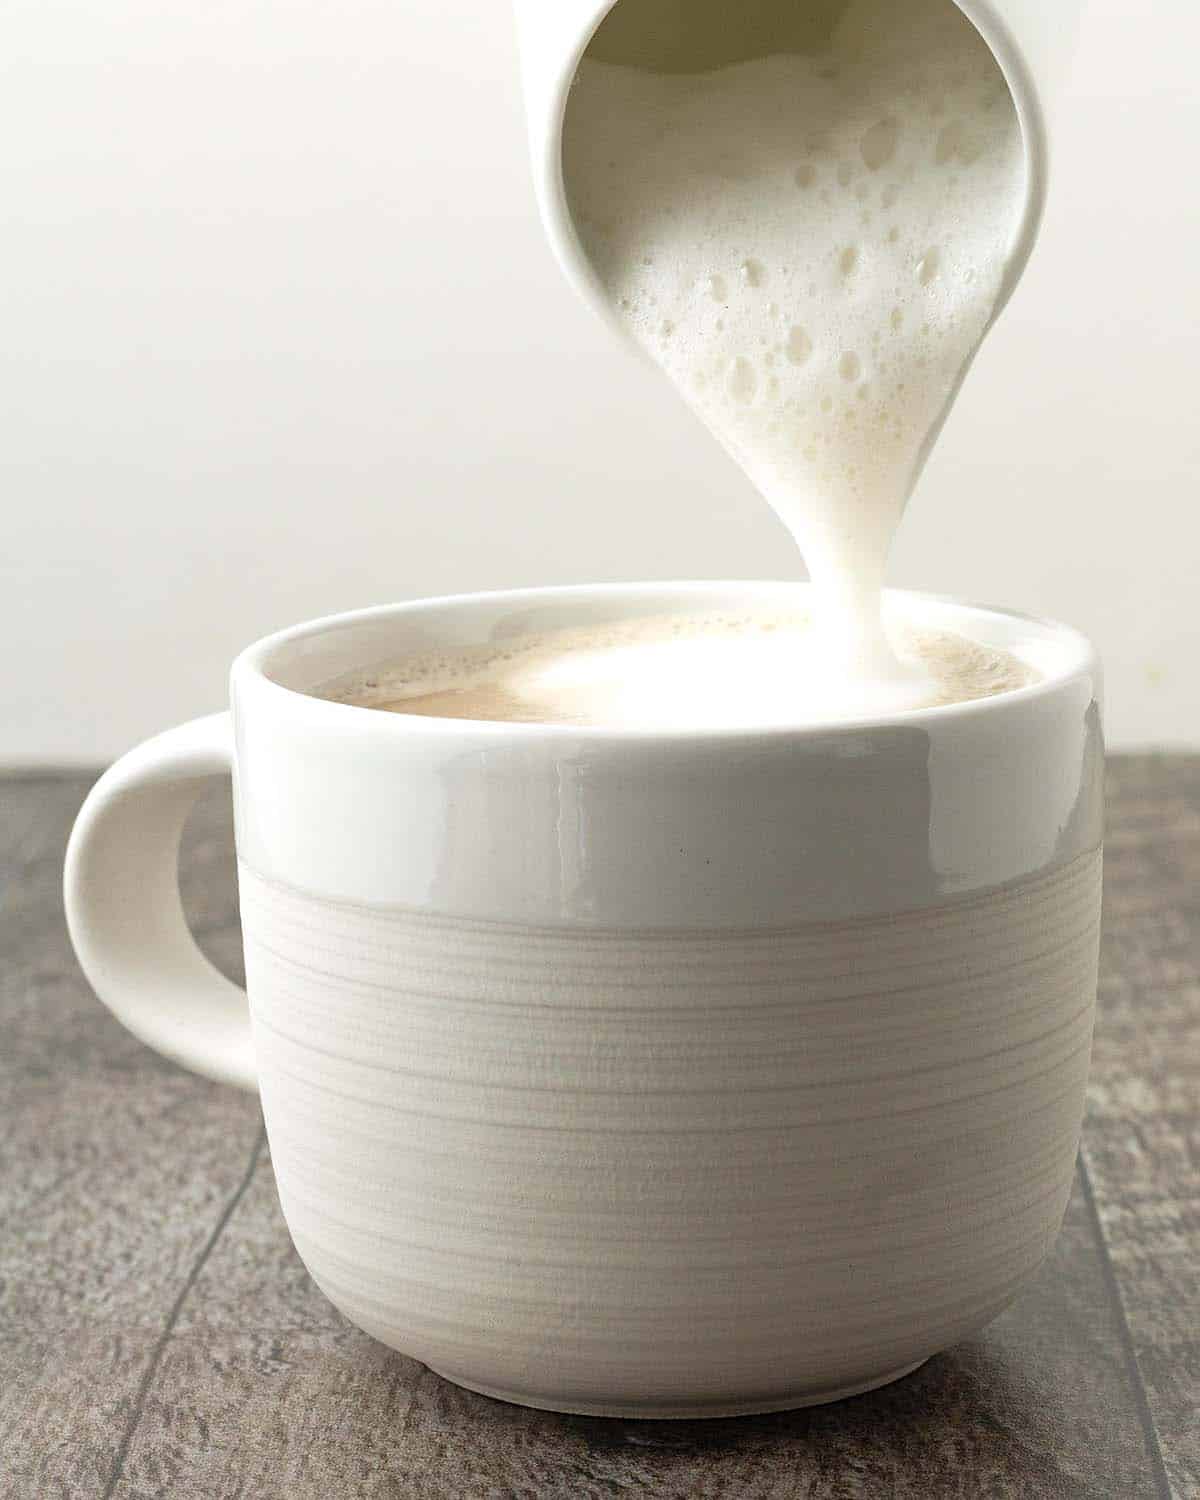 Foamed almond milk being poured on top of a latte.